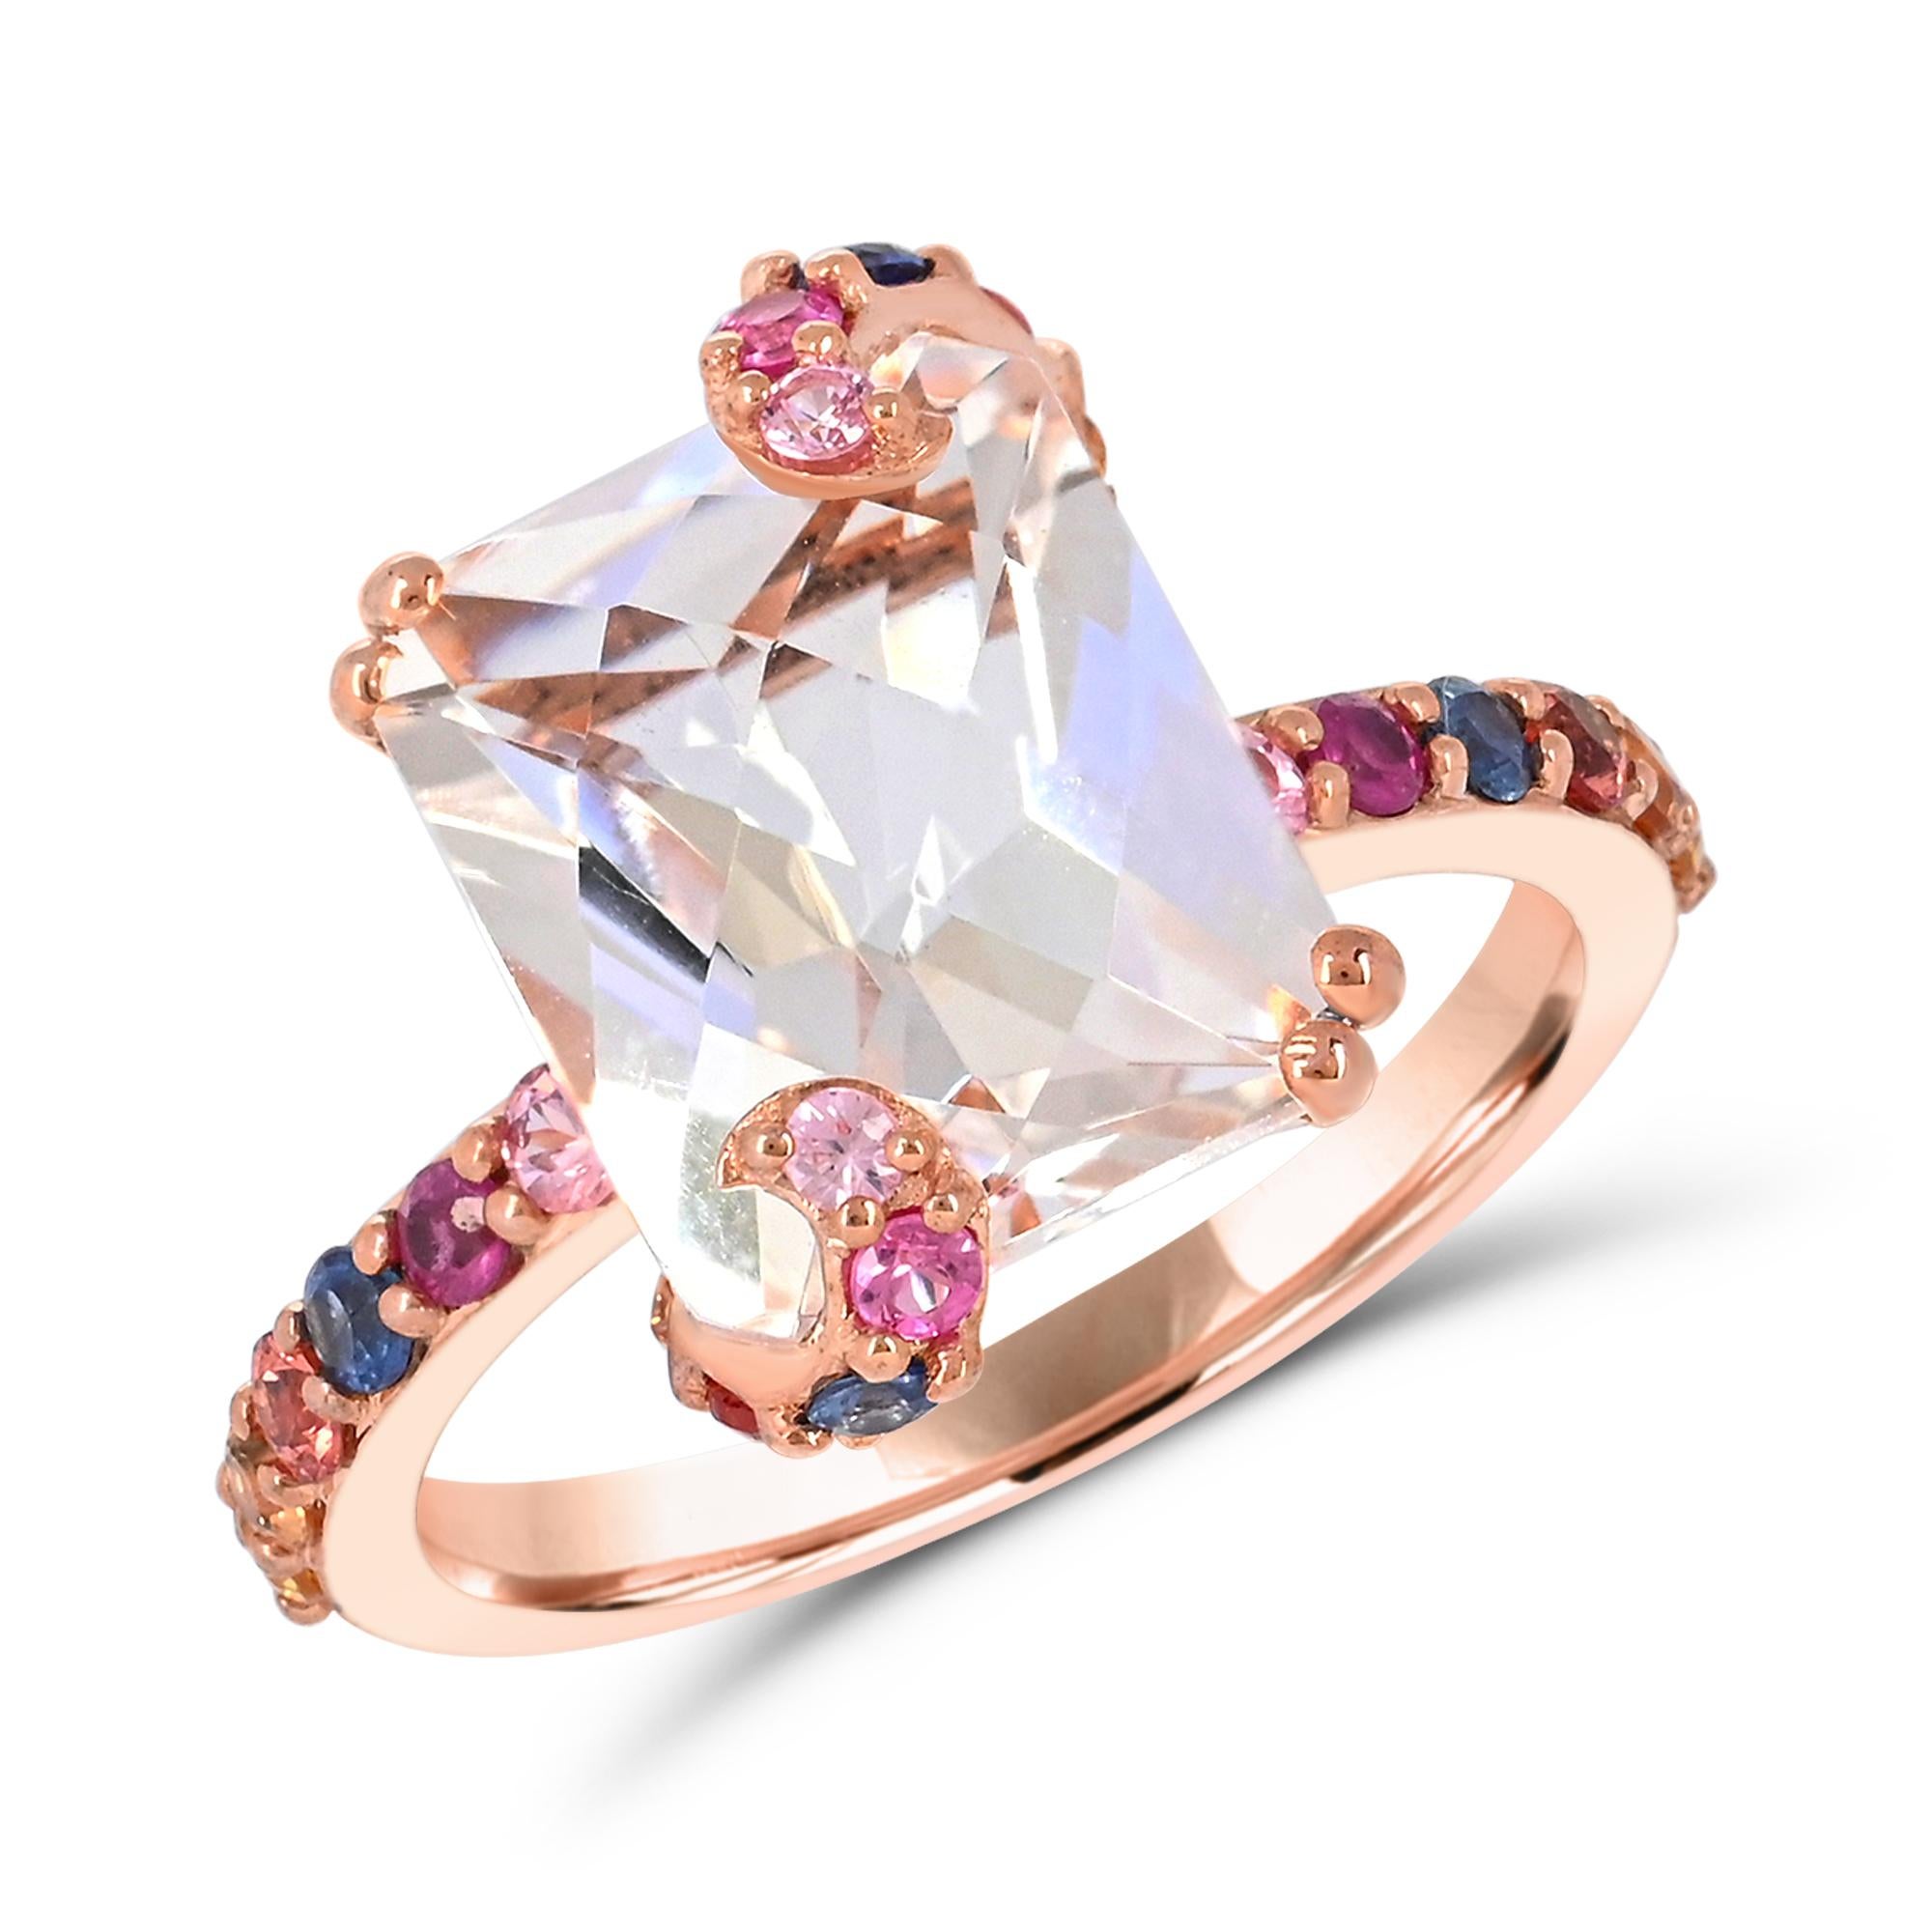 Indulge in the uniqueness of our Emerald-Cut Rock Crystal & Multicolor Sapphire Accented 14K Rose Gold Cocktail Ring. Crafted with meticulous attention to detail, this ring boasts a spectacular combination of one 5-7/8 carat emerald-cut rock crystal